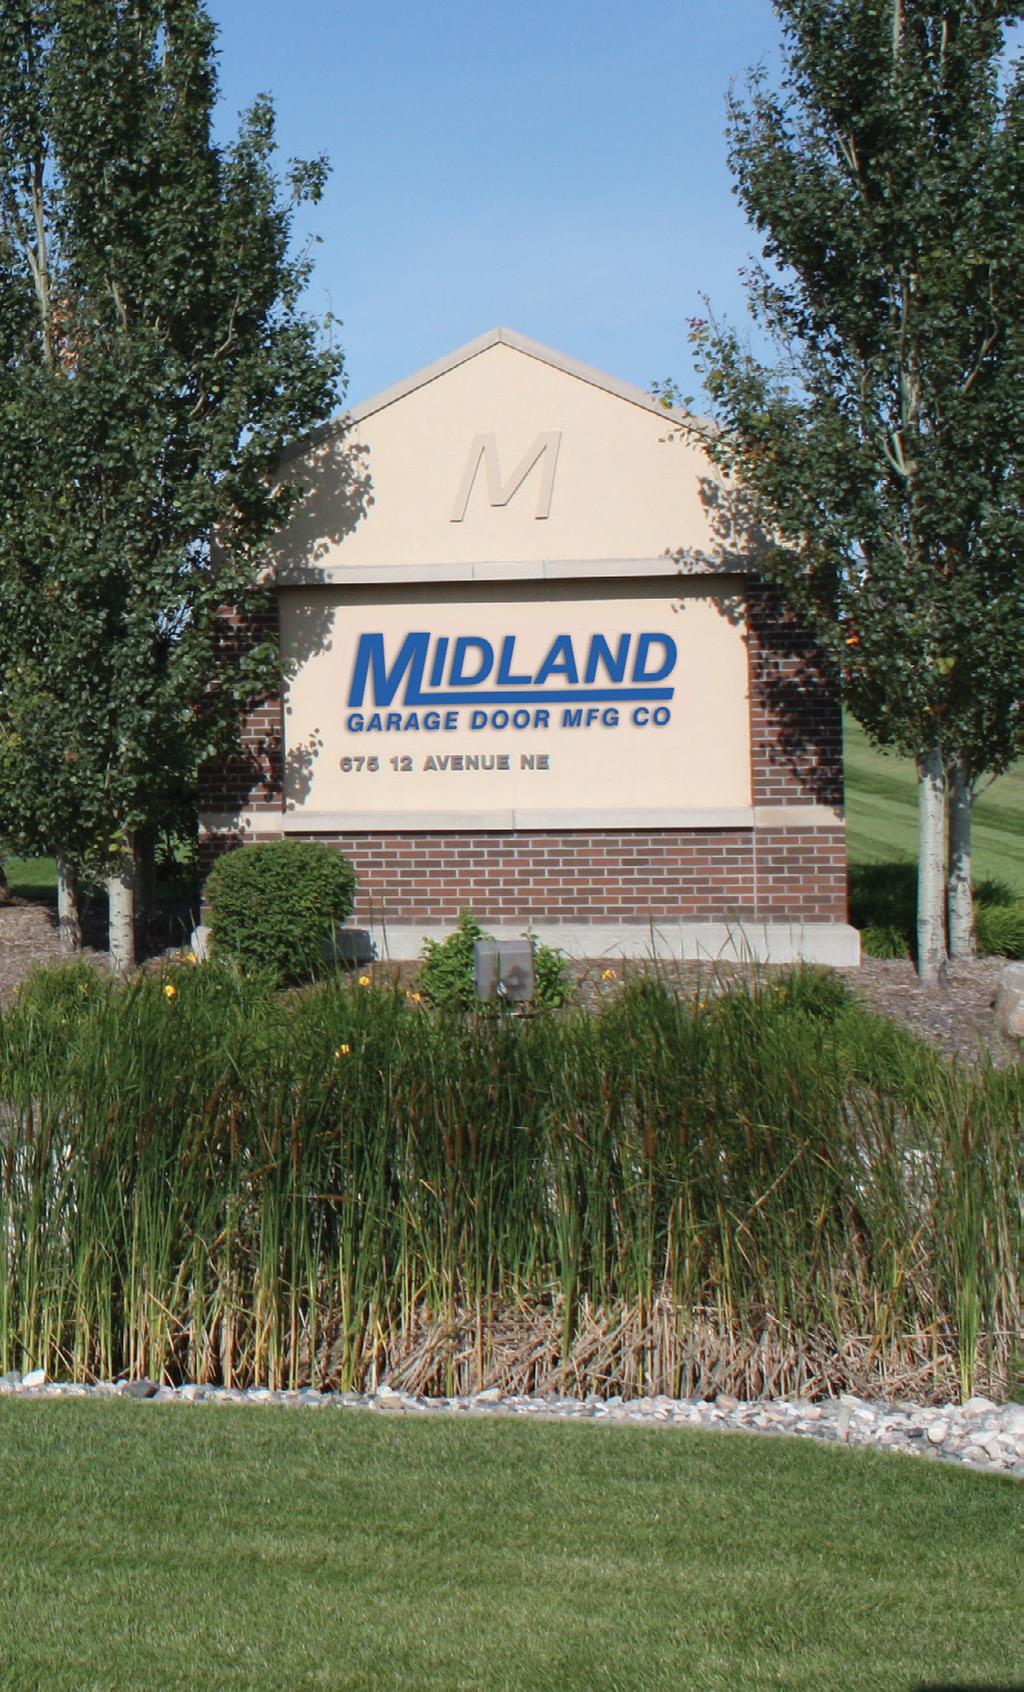 Midland Garage Door Manufacturing Company offers a variety of residential and commercial electric door operators.